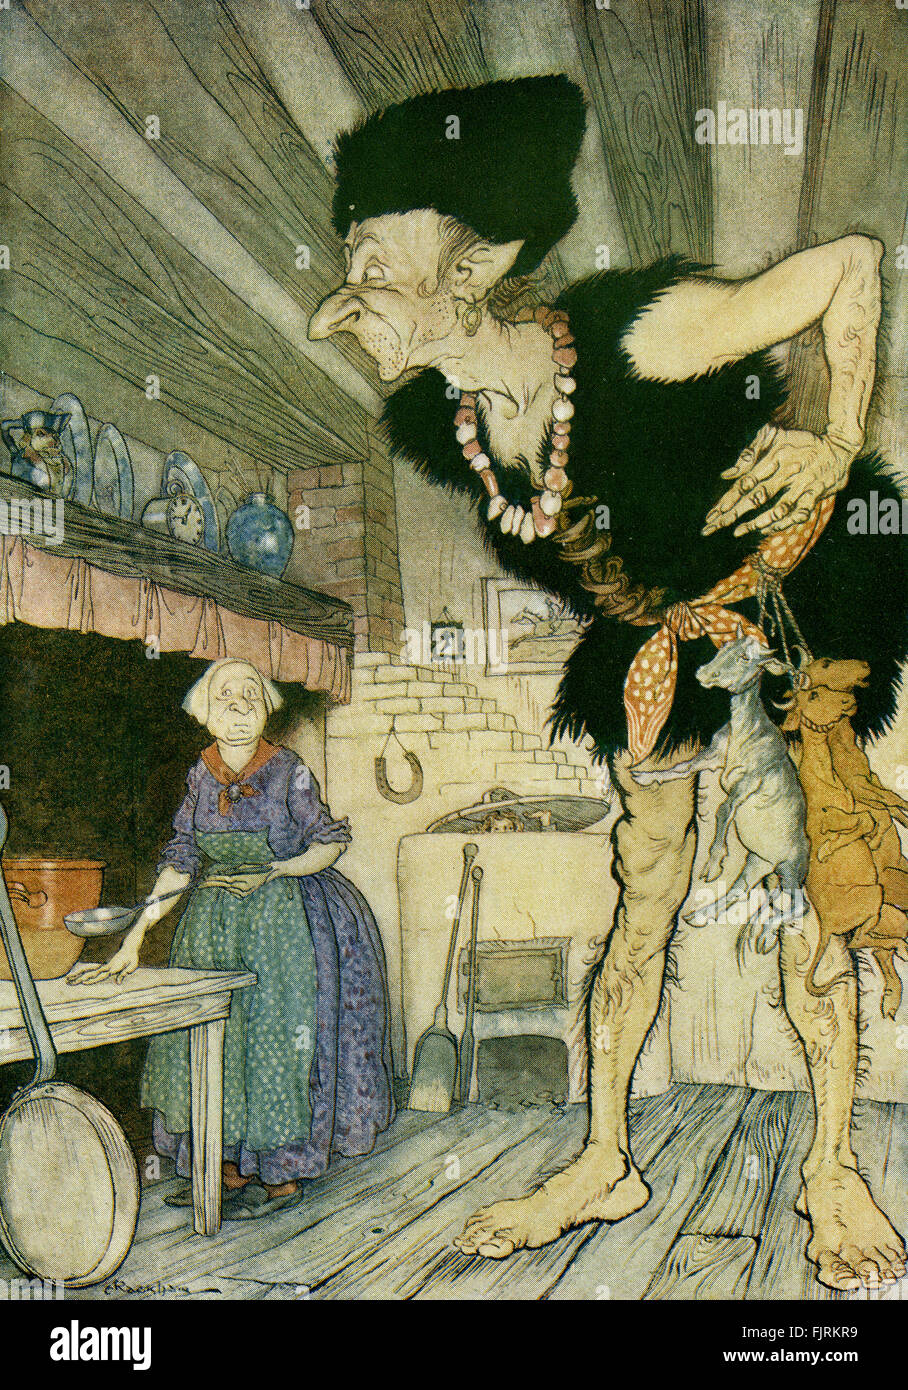 Jack and the Beanstalk, English fairy tale. Jack peeps into the ogre's kitchen and sees the ogre and his wife. Caption reads: 'Fee-fi-fo-fum, I smell the blood of an Englishman'. Illustration by Arthur Rackham (1867 - 1939) Stock Photo